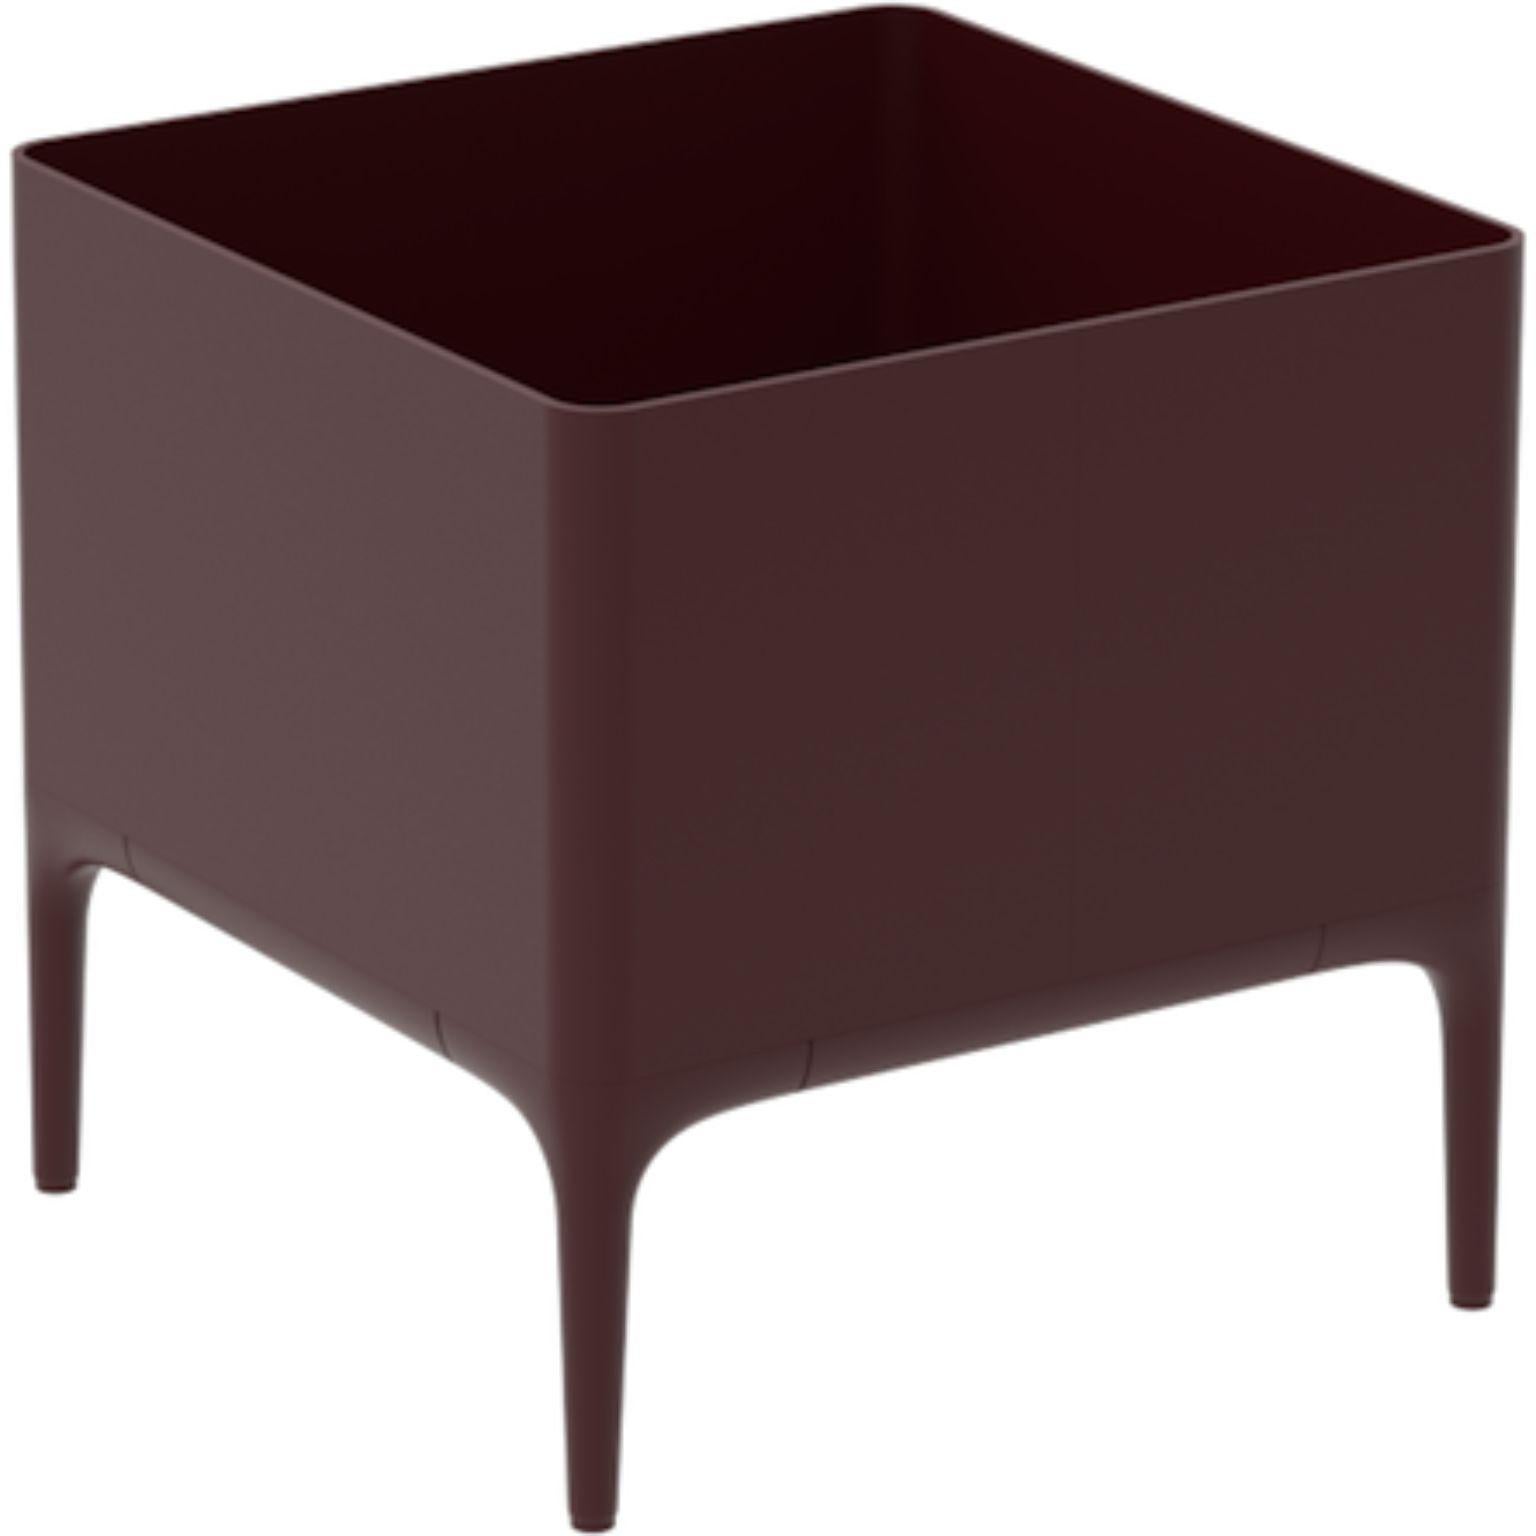 Xaloc Burgundy 45 pot by Mowee
Dimensions: D 45 x W 45 x H 45 cm
Material: Aluminium
Weight: 8 kg
Also available in different colours and finishes.

 Xaloc synthesizes the lines of interior furniture to extrapolate to the exterior, creating an